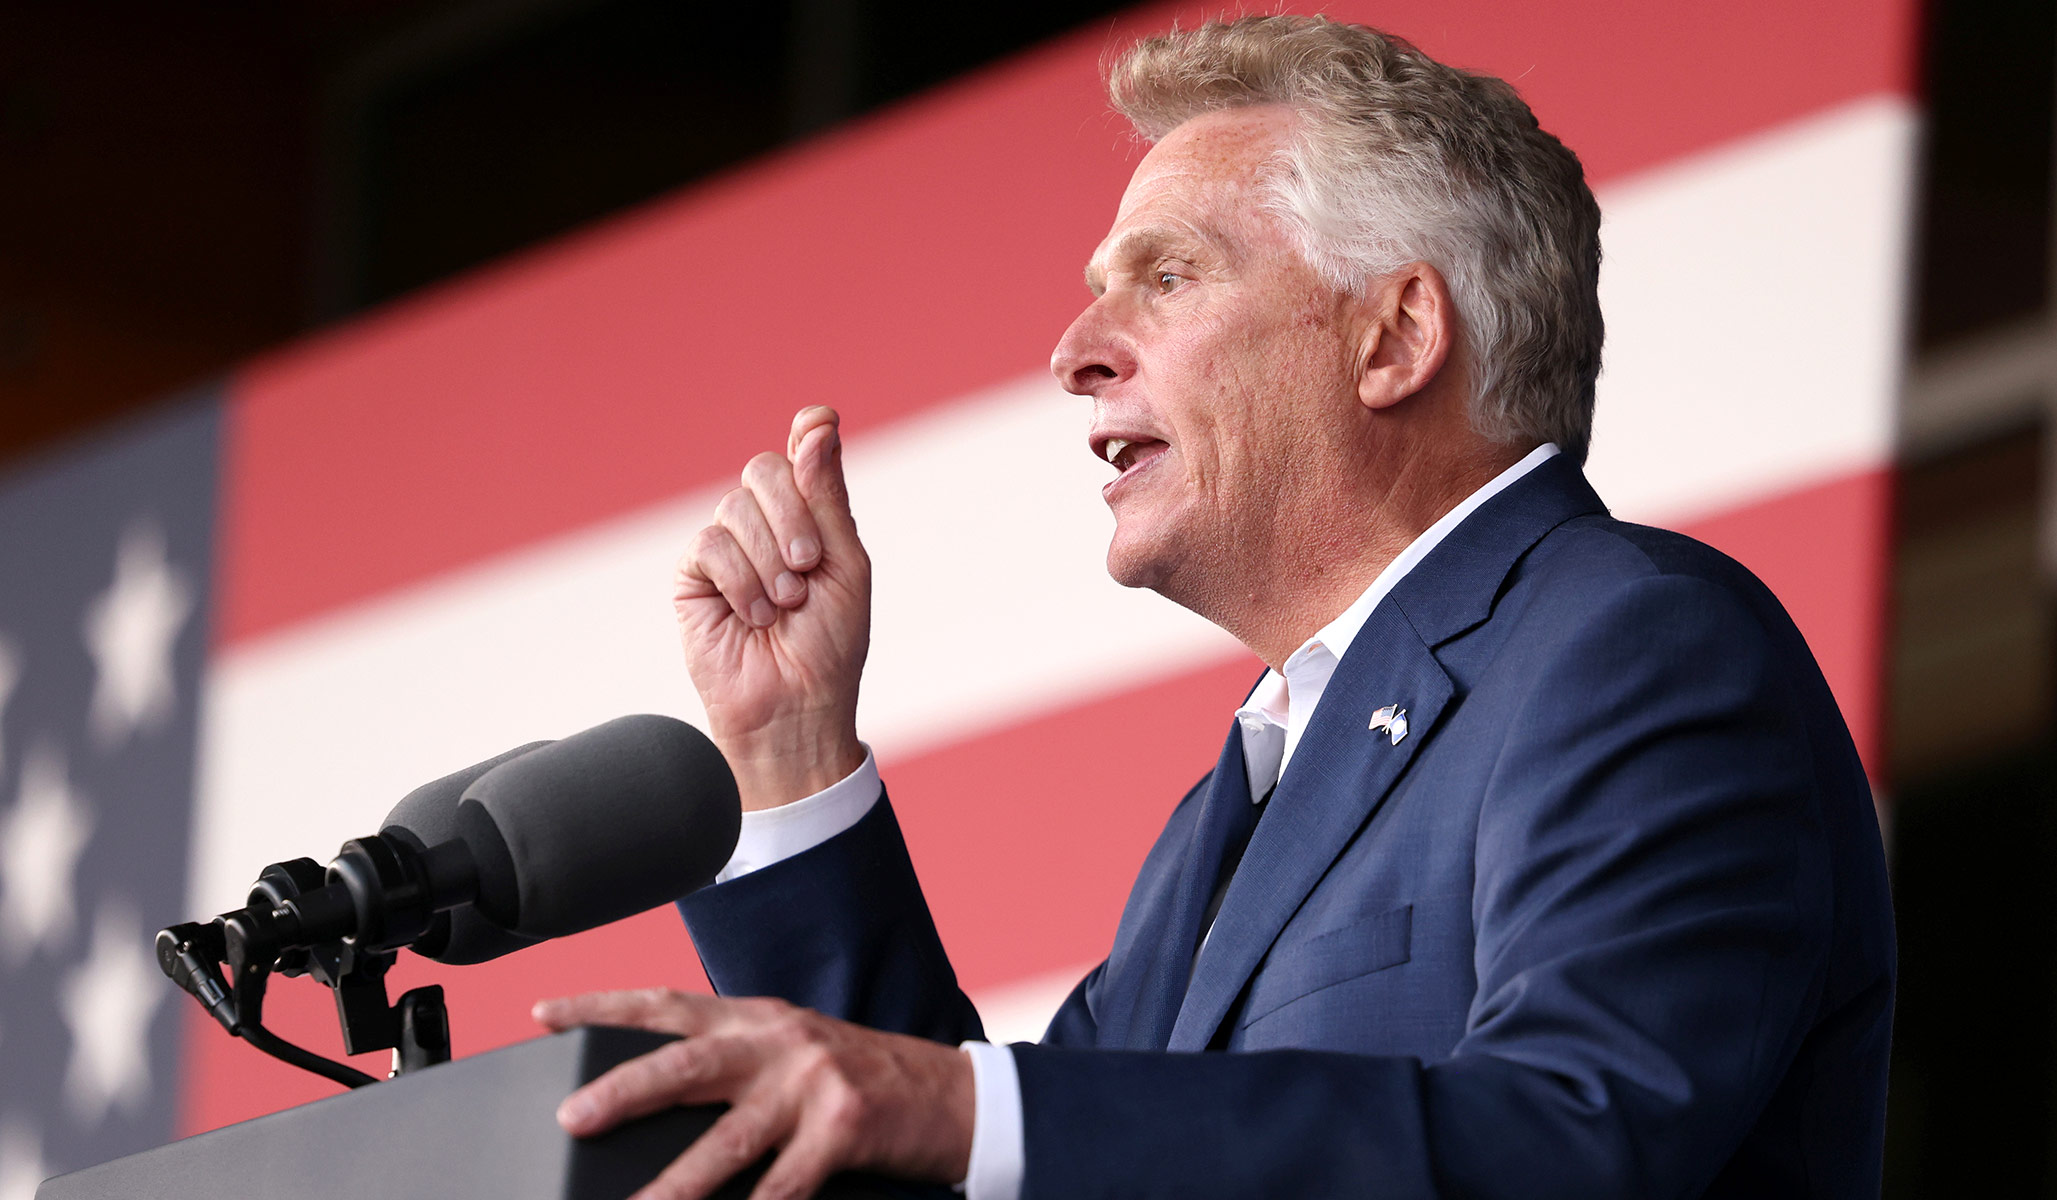 McAuliffe Campaign Accidentally Sends Fox an Email Revealing Effort to ‘Kill’ Their Story